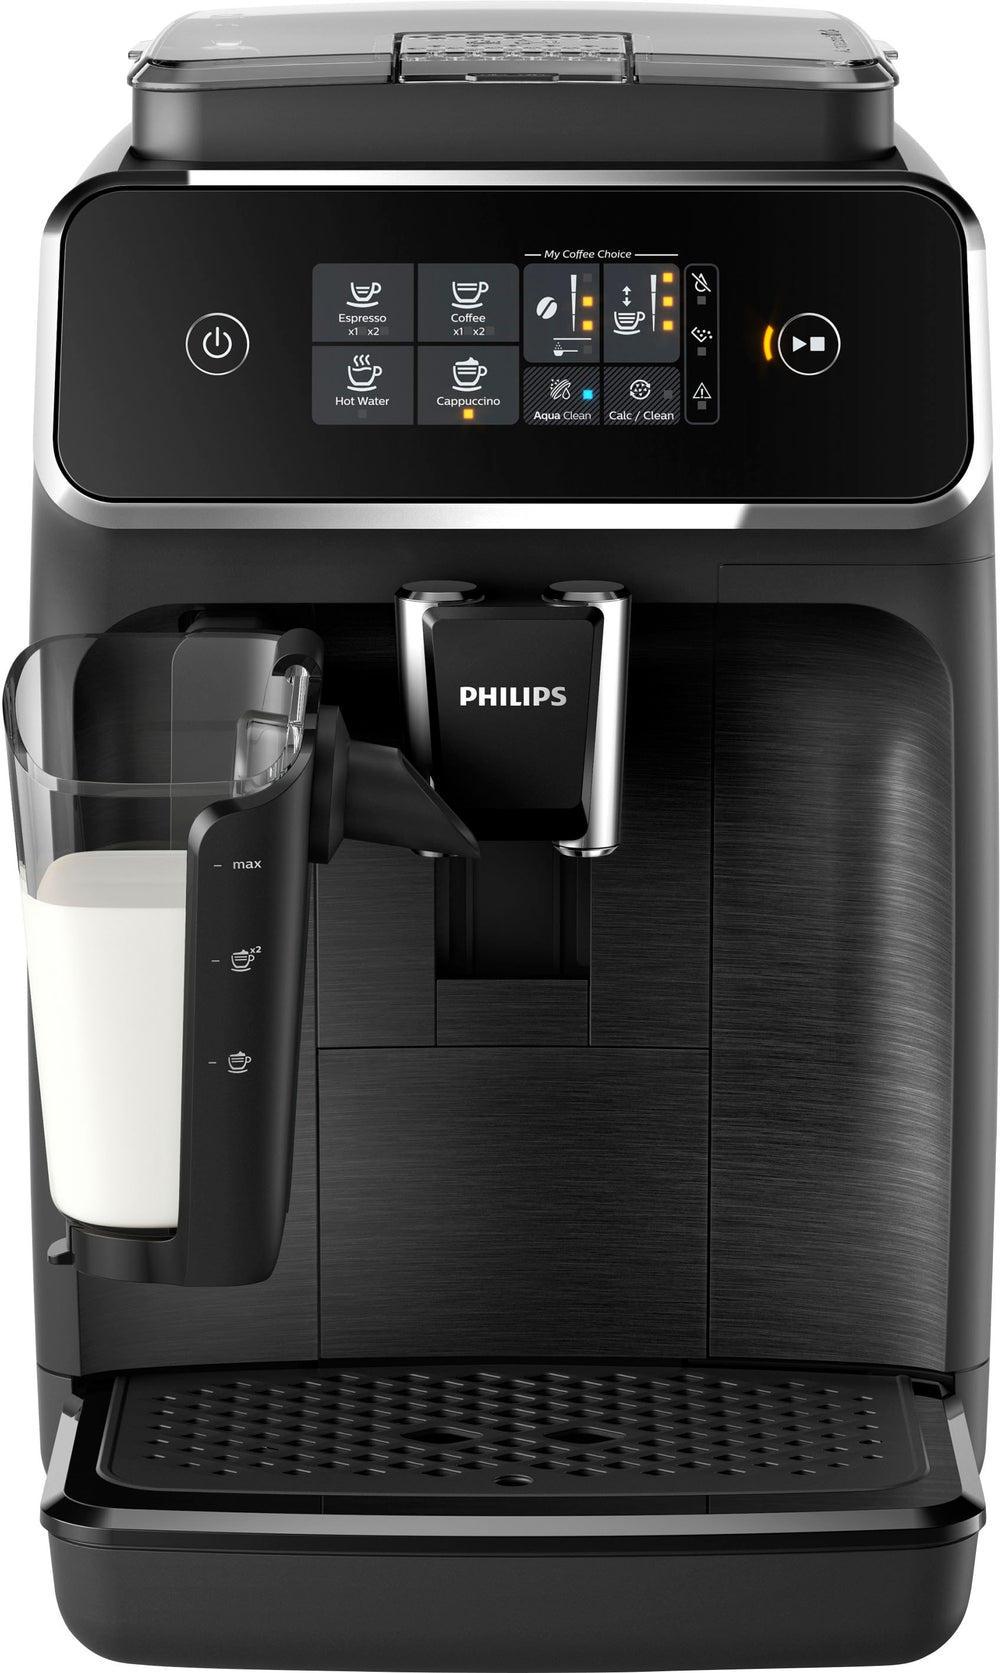 Philips 2200 Series Fully Automatic Espresso Machine with LatteGo - Black_1